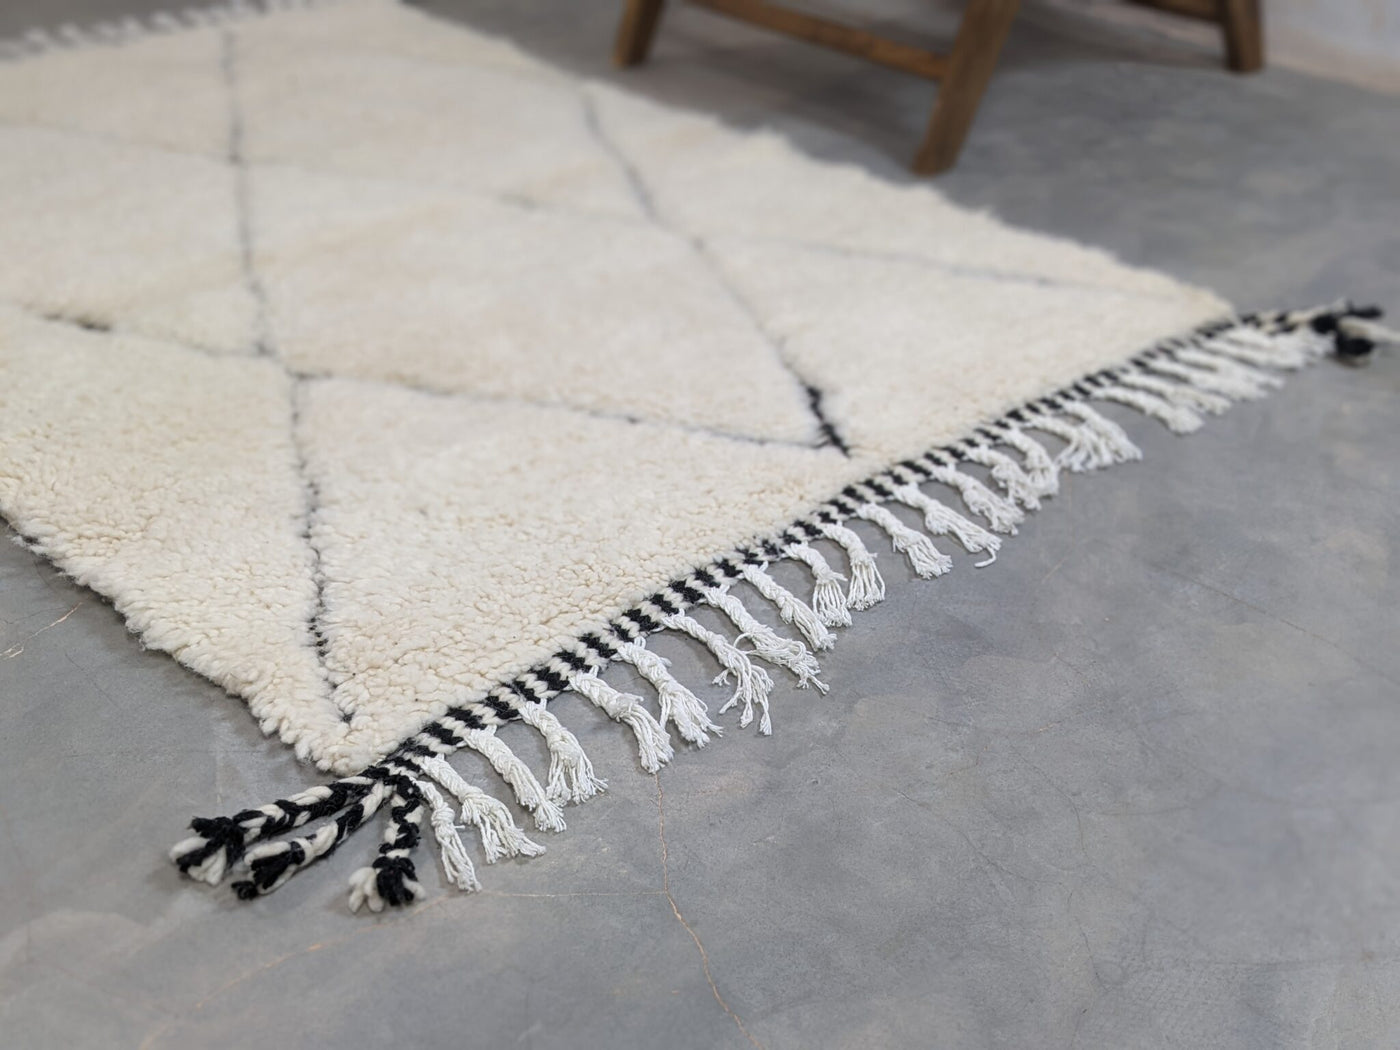 Small Moroccan Rugs - Berber Handwoven Rugs for Home Décor (150 x 107 cm)